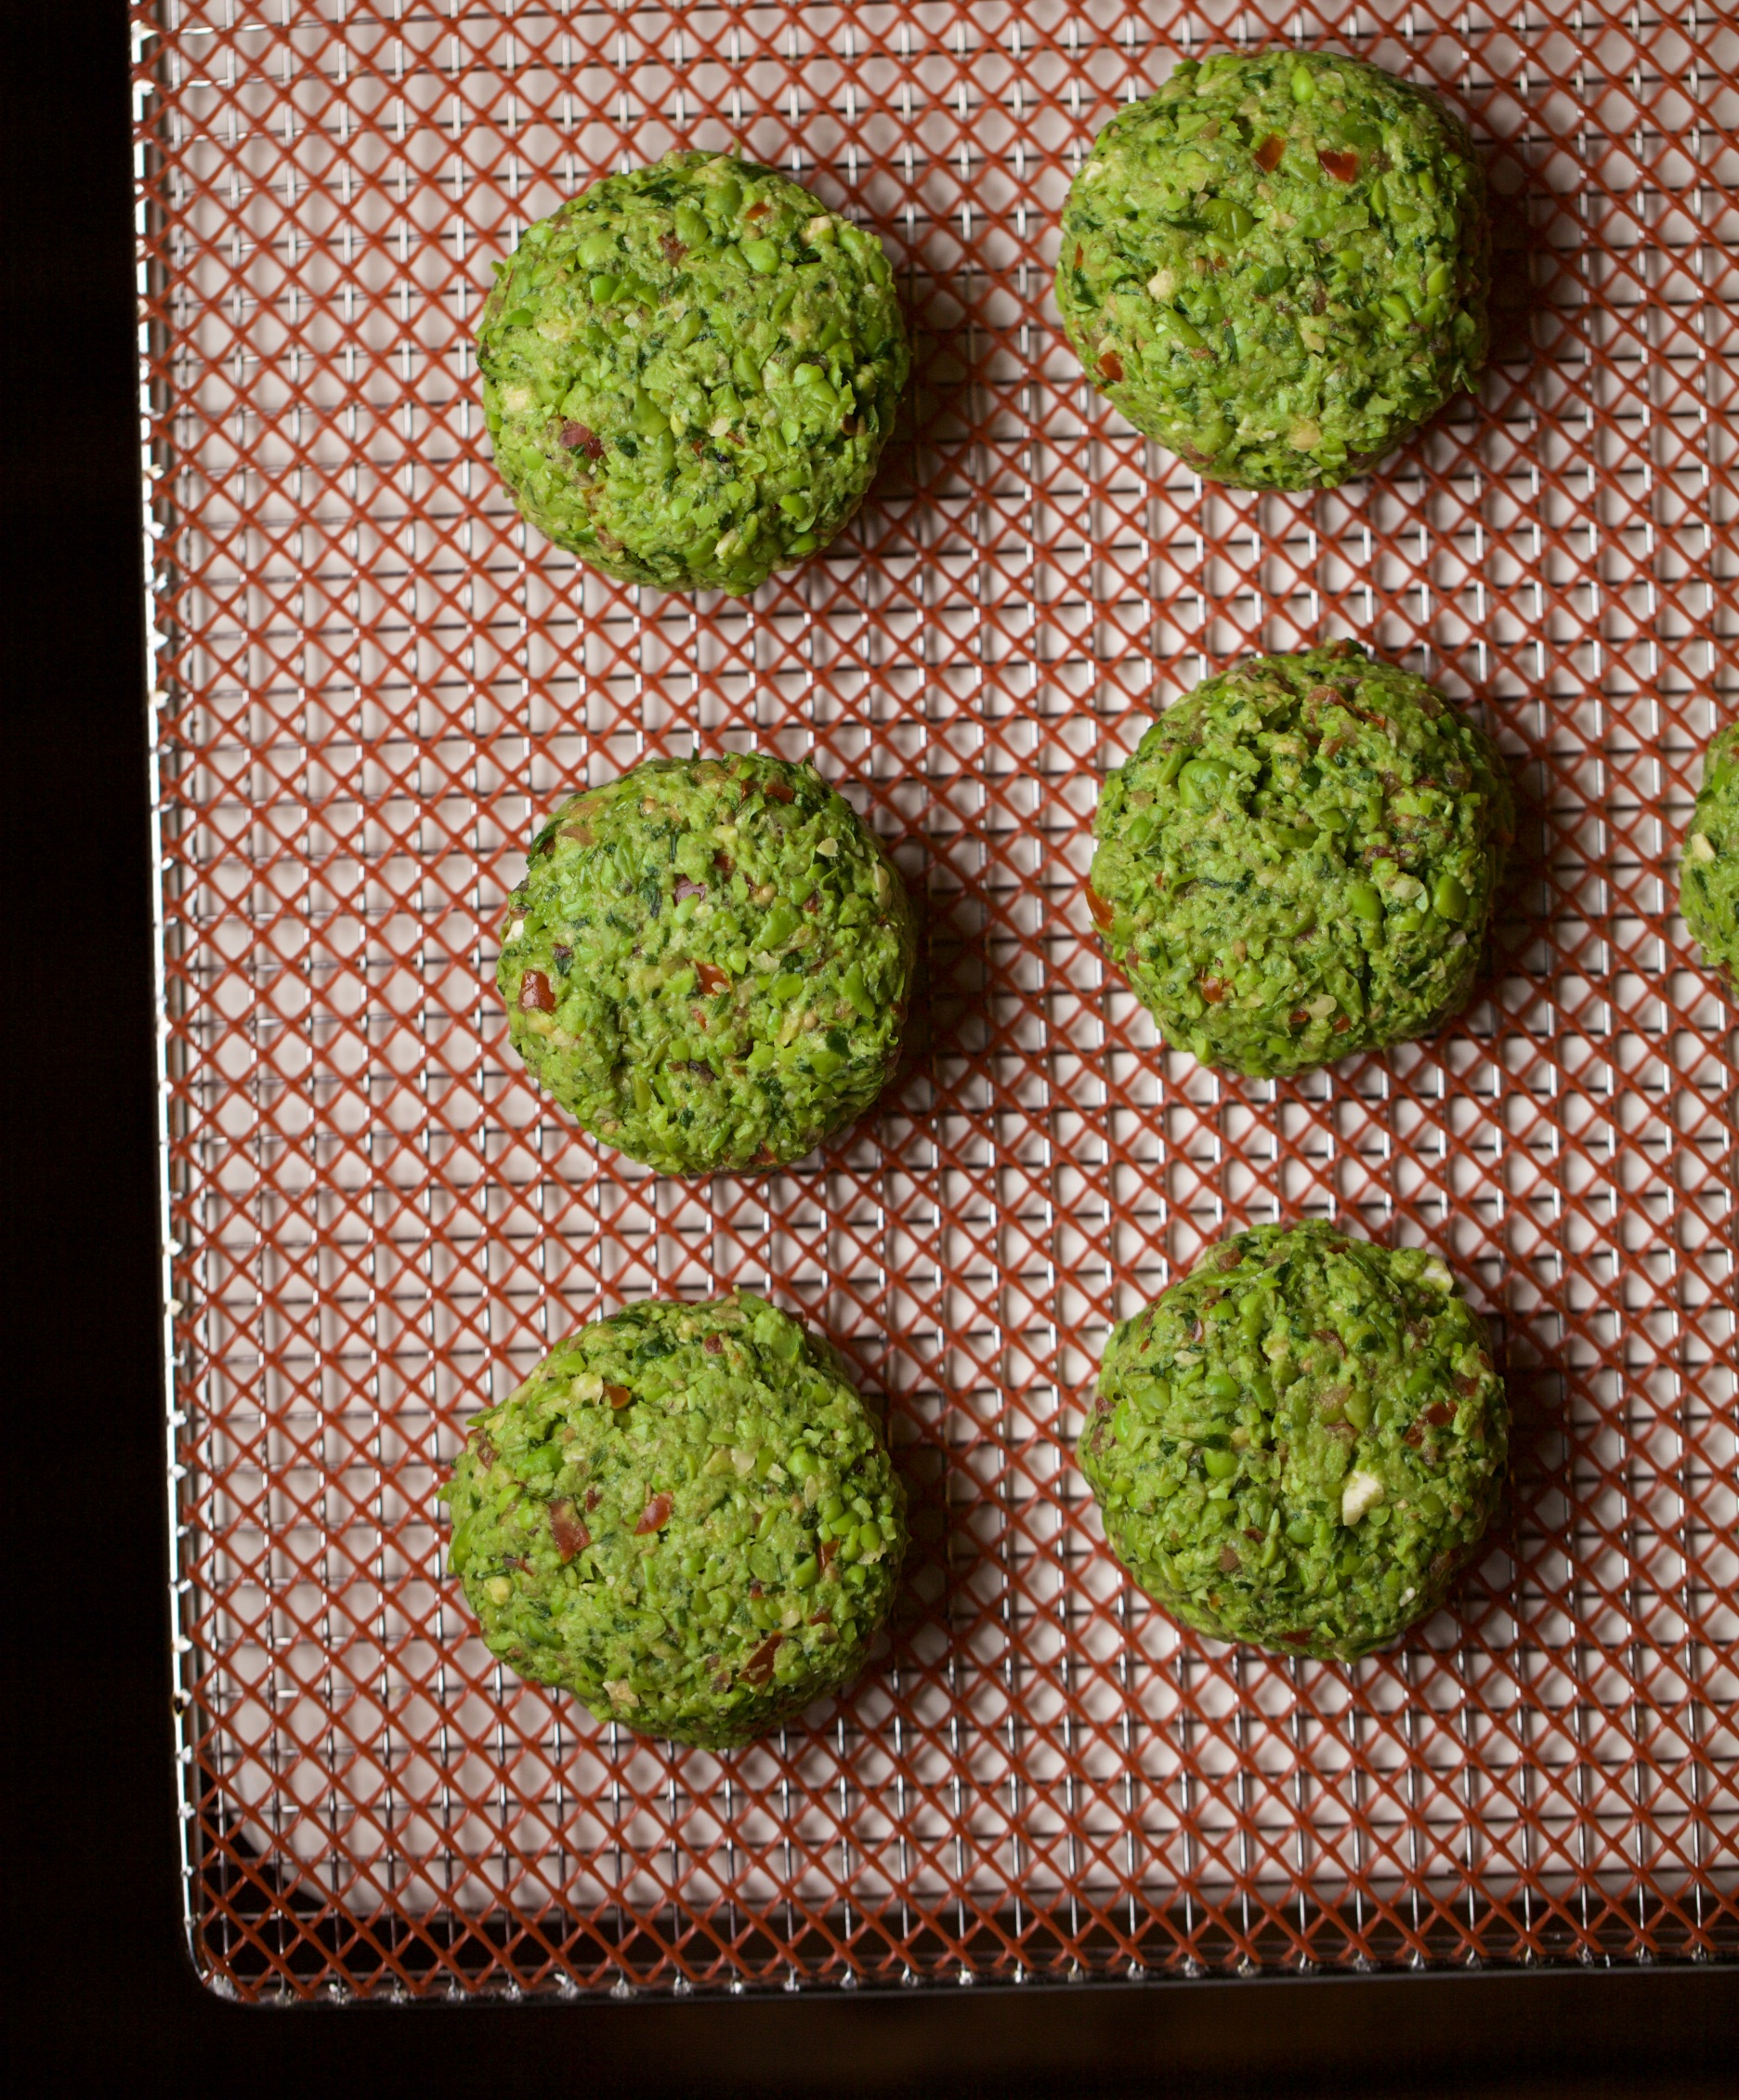 Pea and mint croquettes on a dehydrator sheet